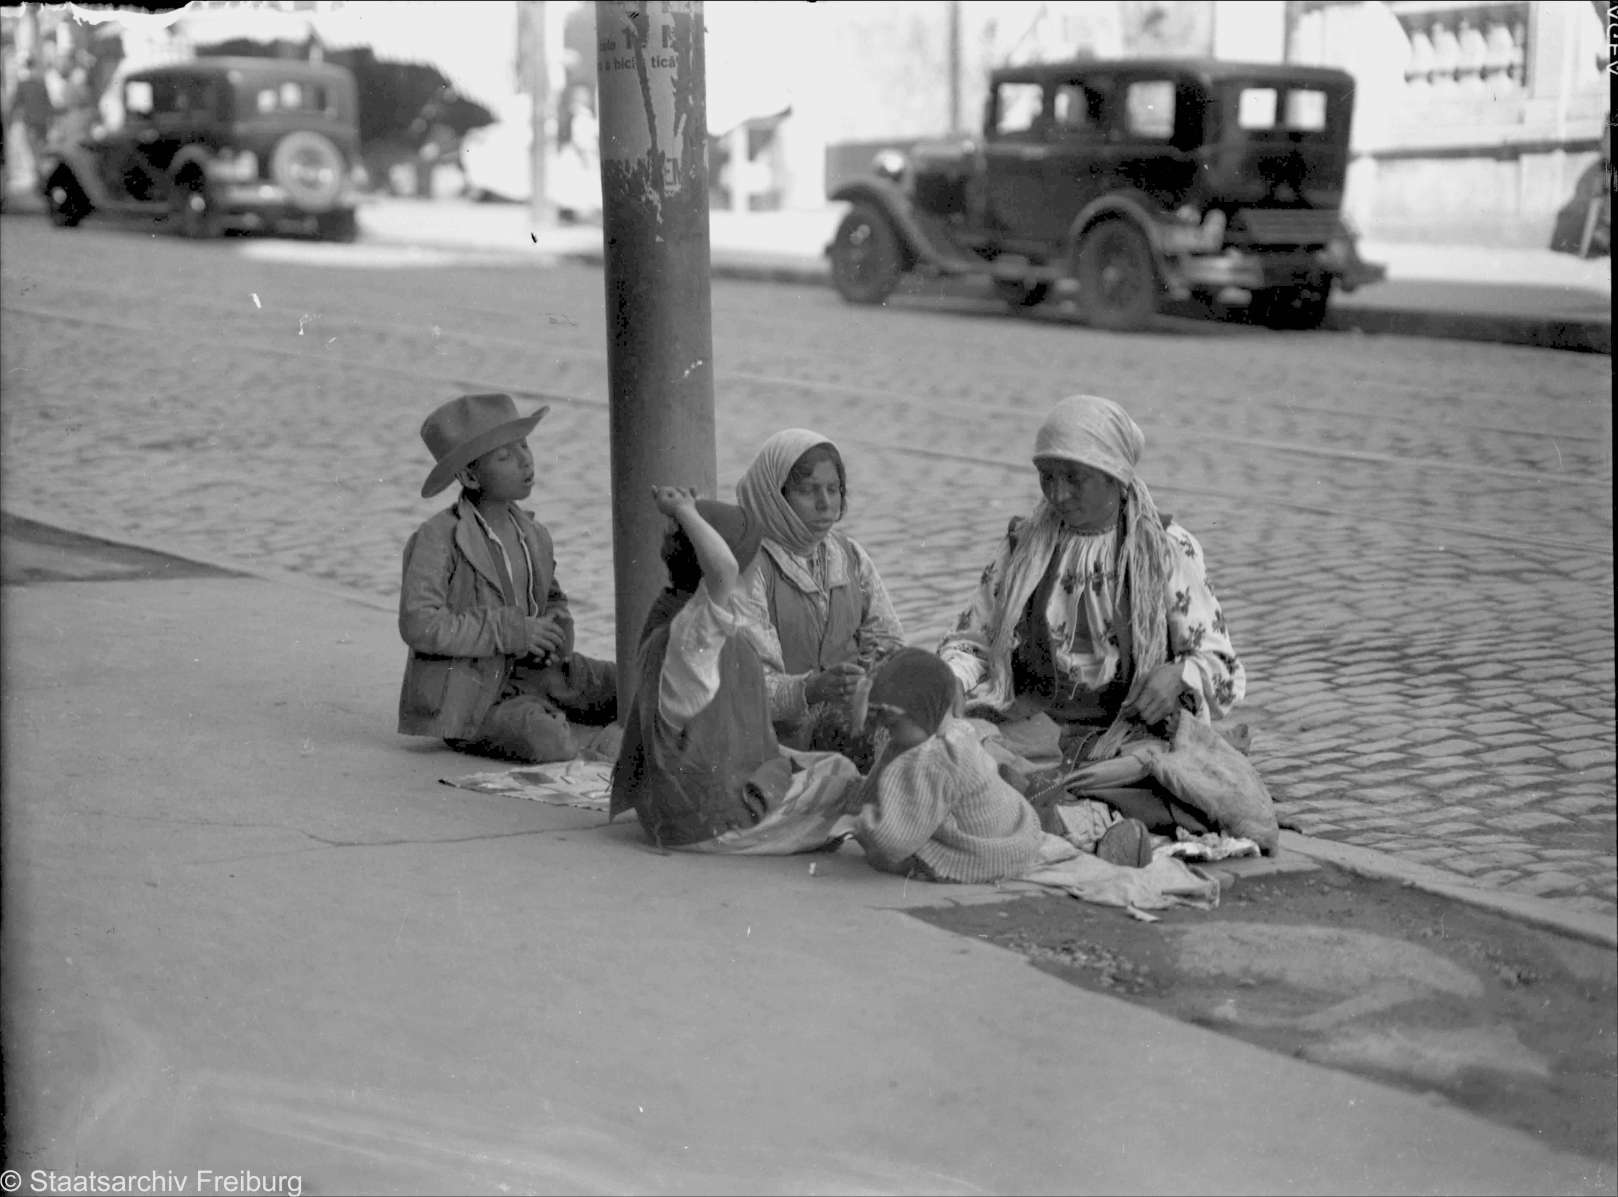 Gypsy family in the street